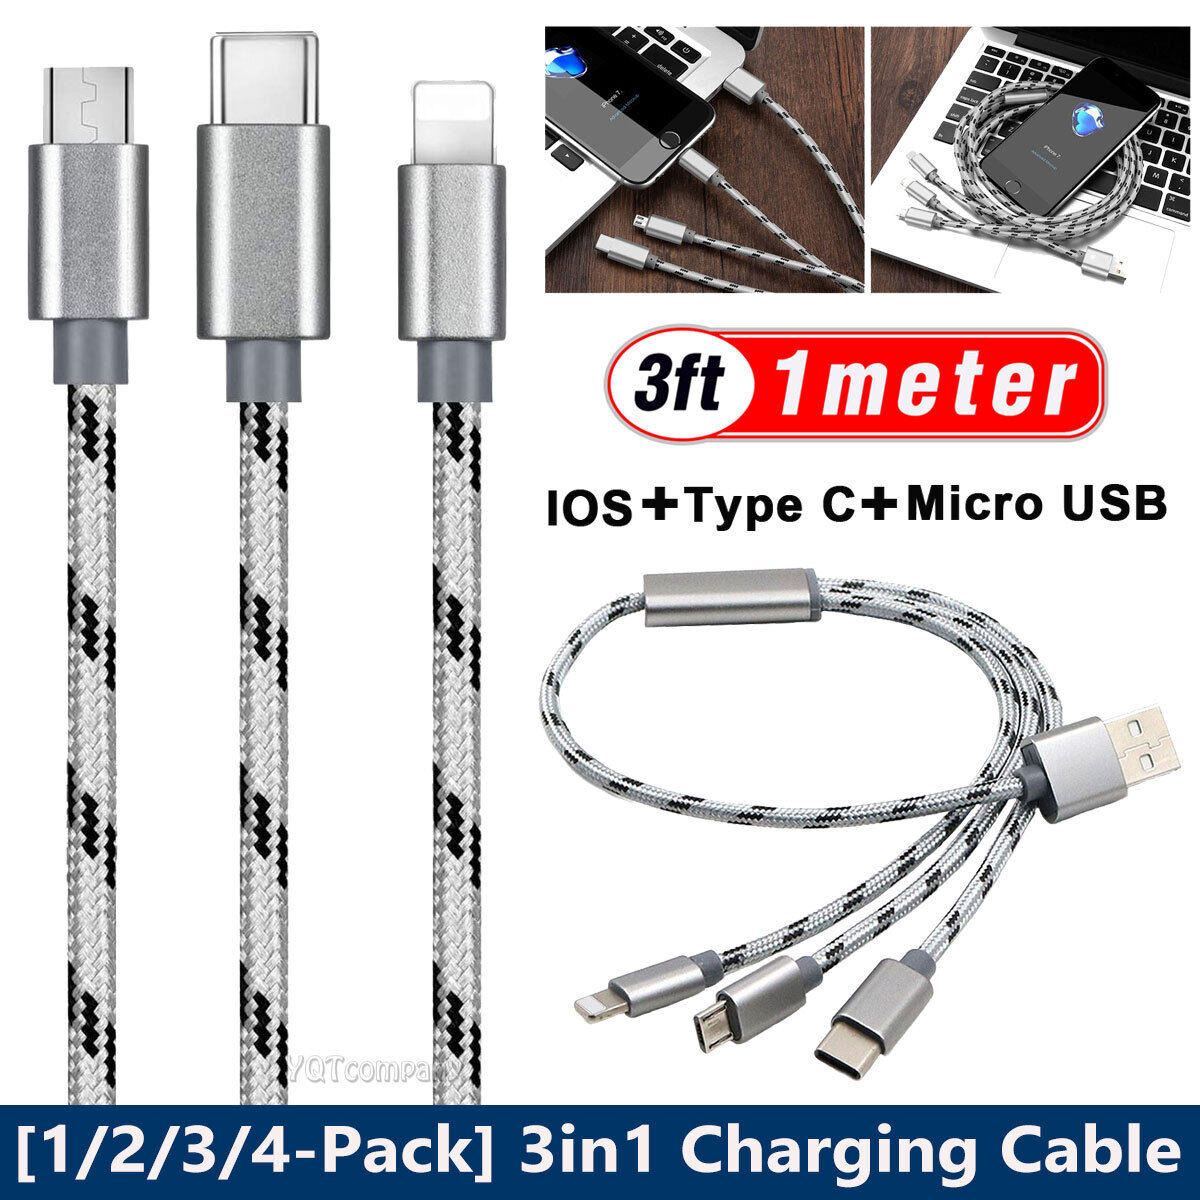 Hylde rytme i dag 3 in 1 USB Charging Cable Universal Charger Cord For Apple iPad Mini 1/2 /3/4/Air | eBay